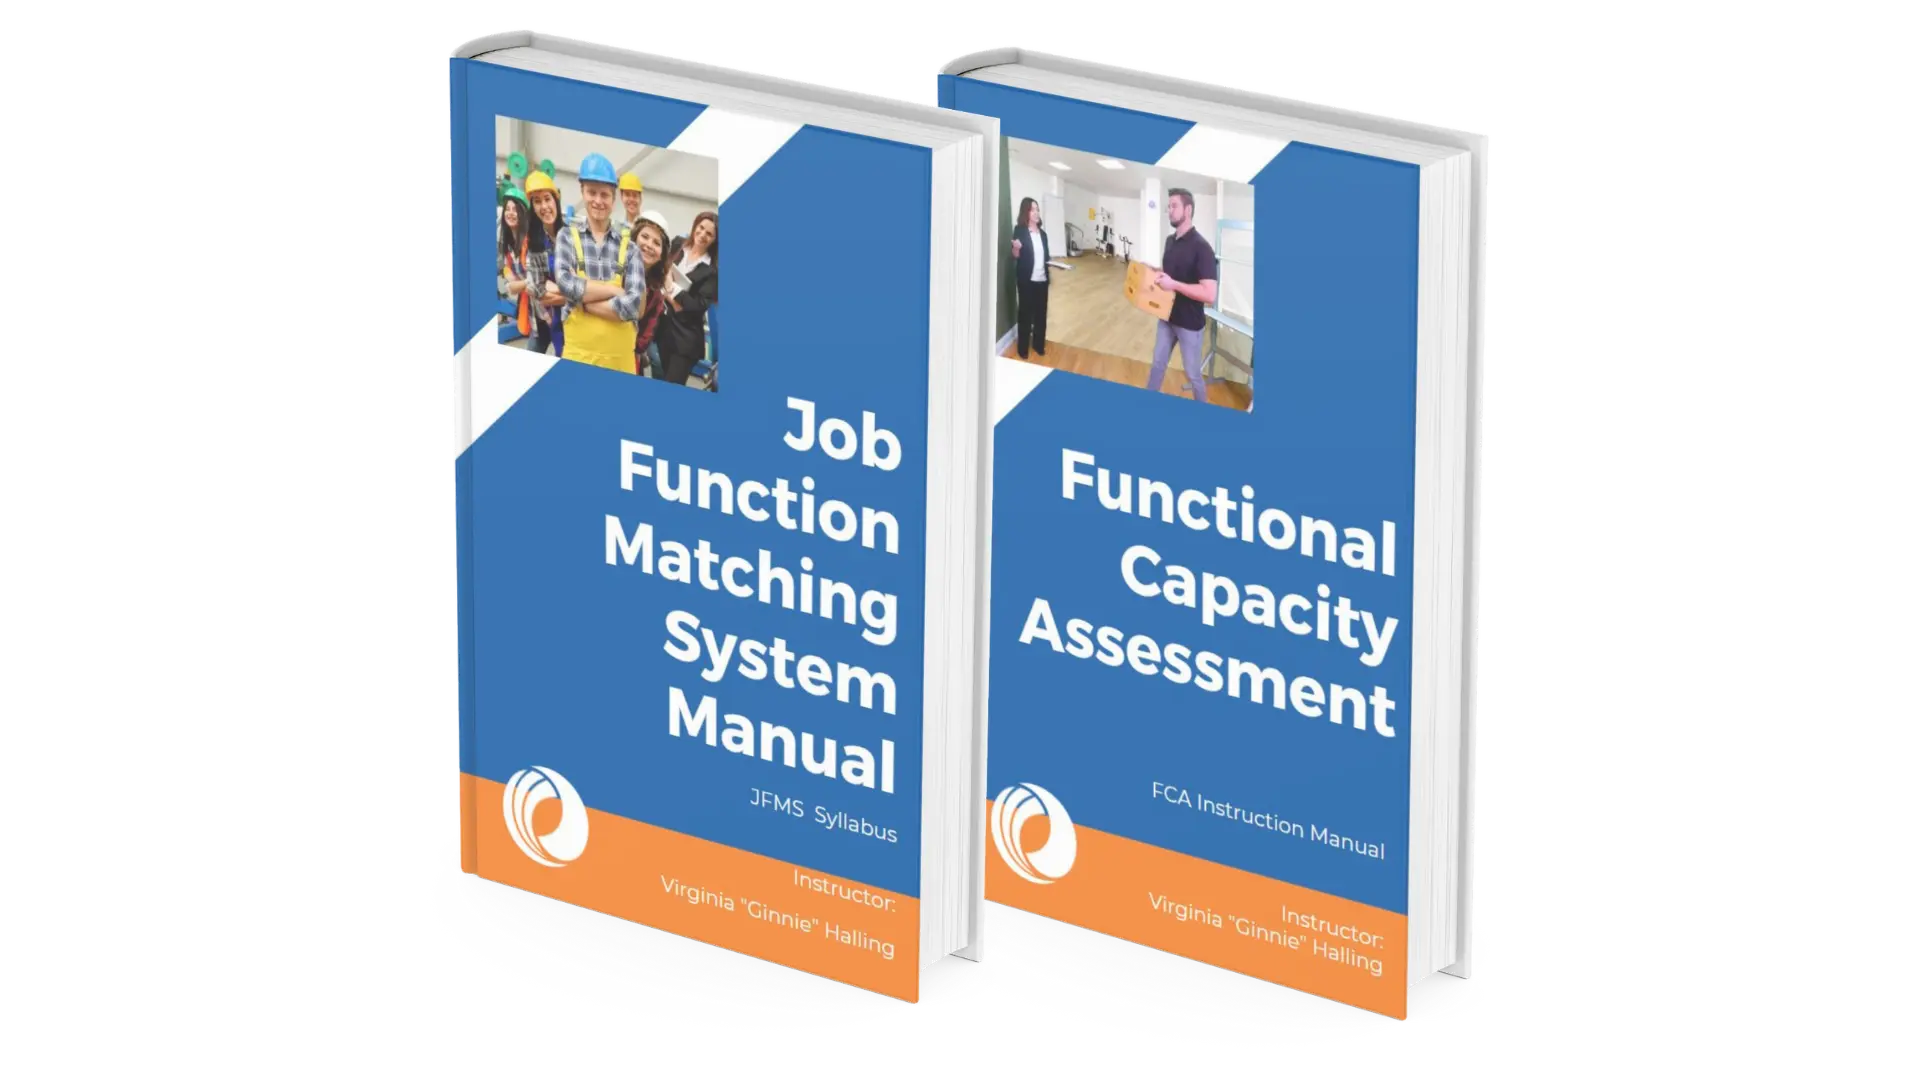 The Job Function Matching System and Functional Capacity Assessment Course Manuals.